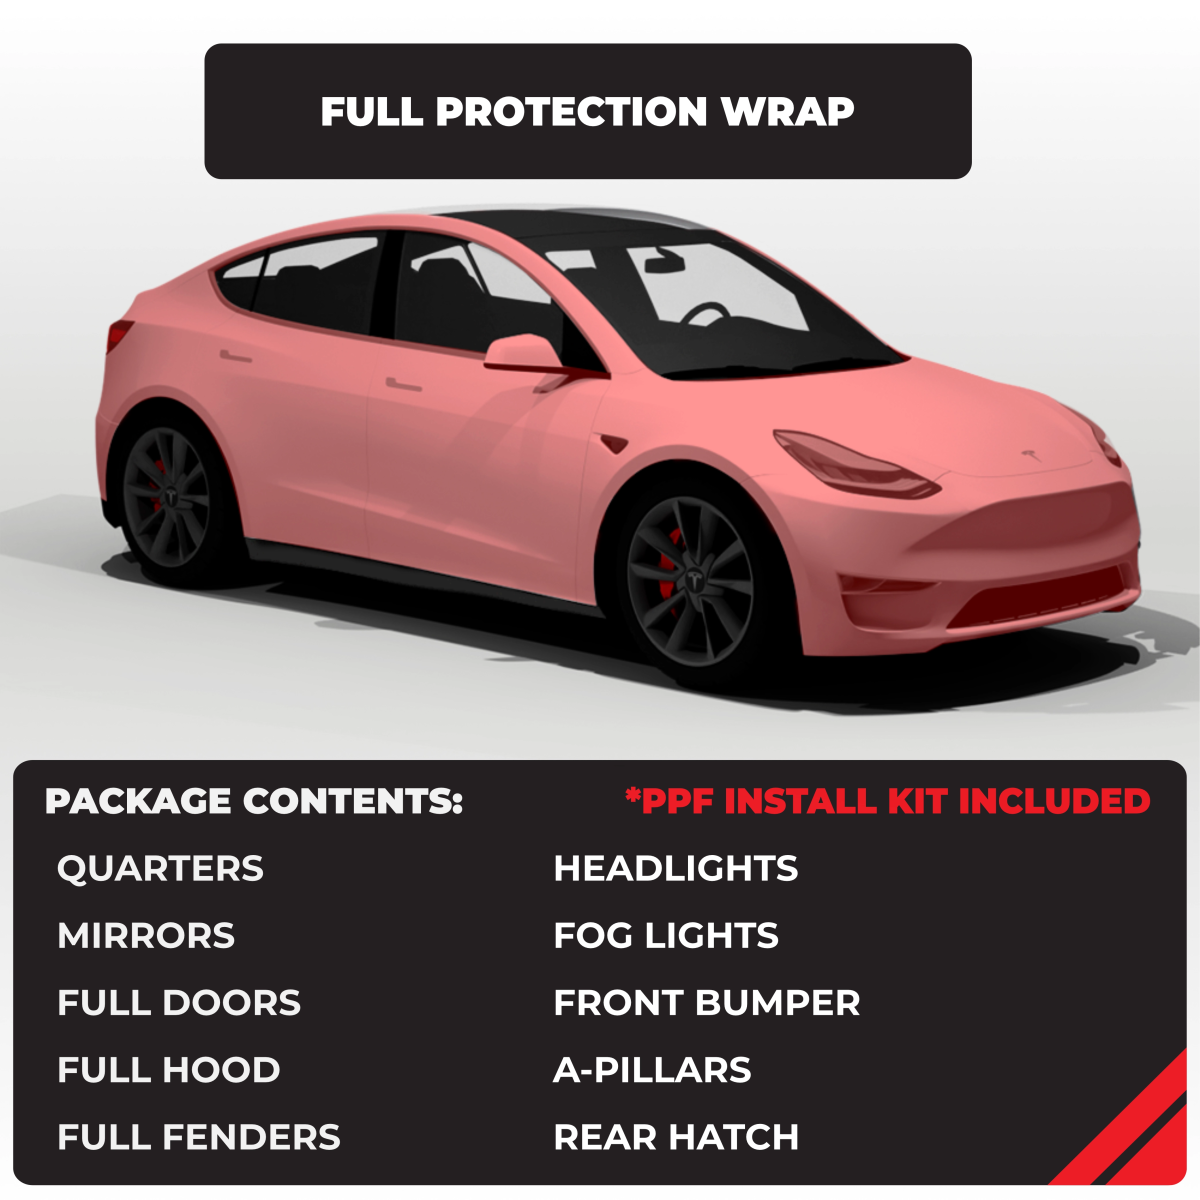 Model 3: Paint Protection Film (PPF) for the hood - Tesla-Protect